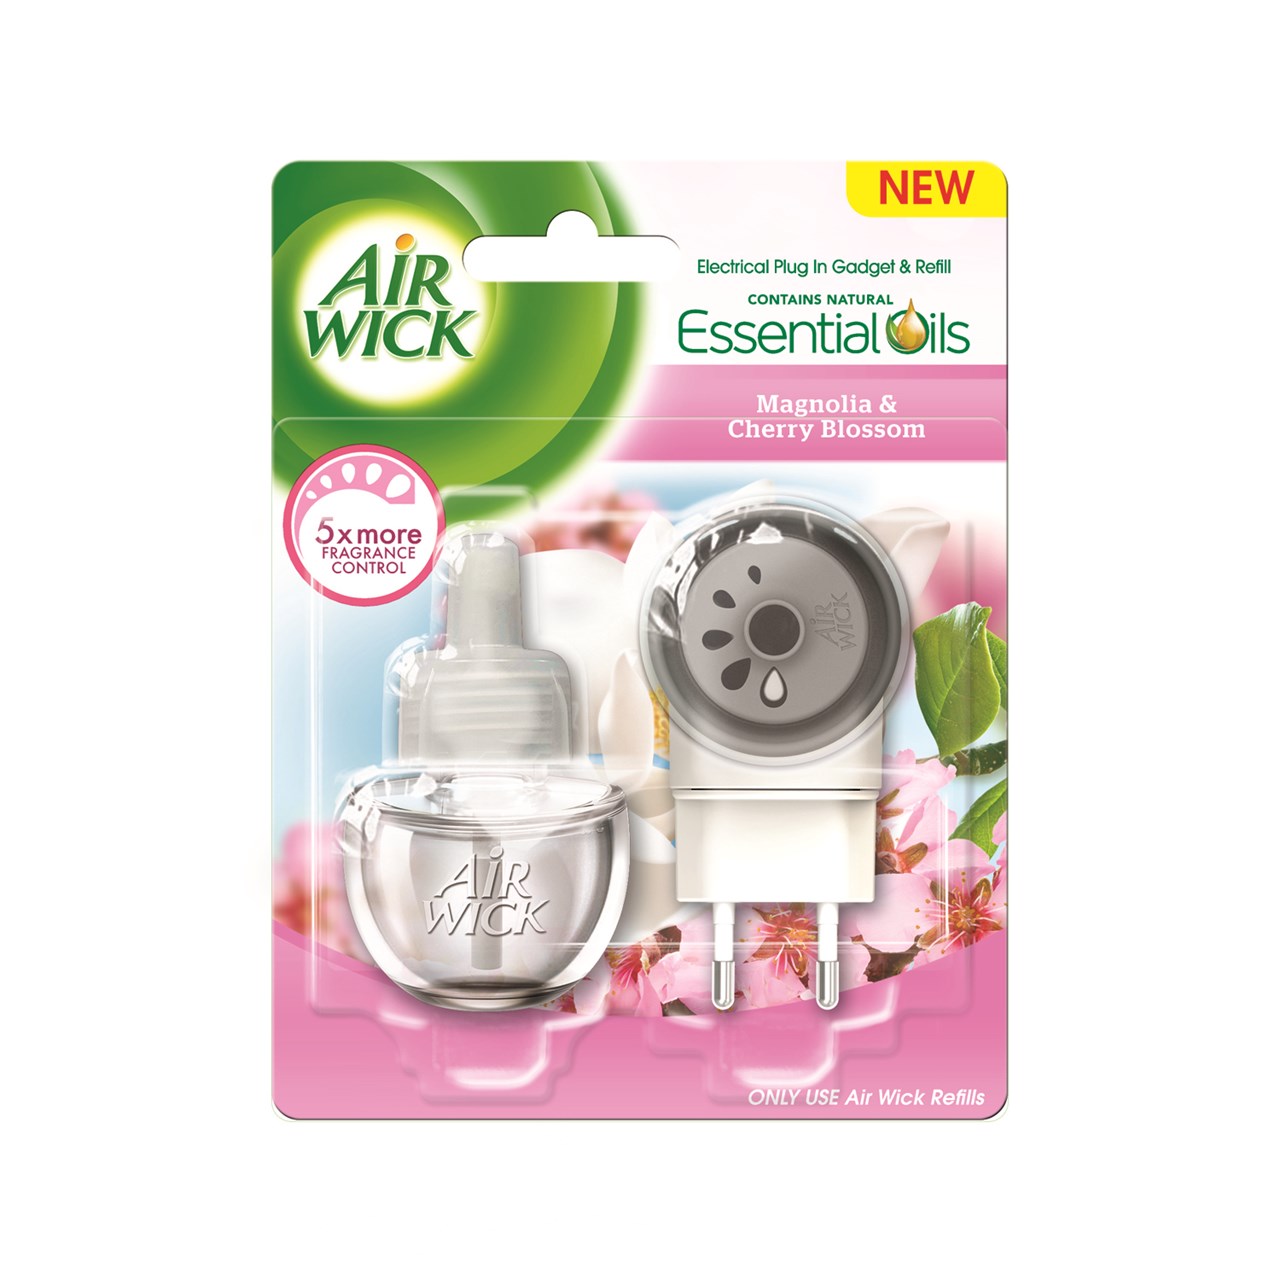 Magnolia & Cherry Blossom Electrical Plug In Gadget & Refill 